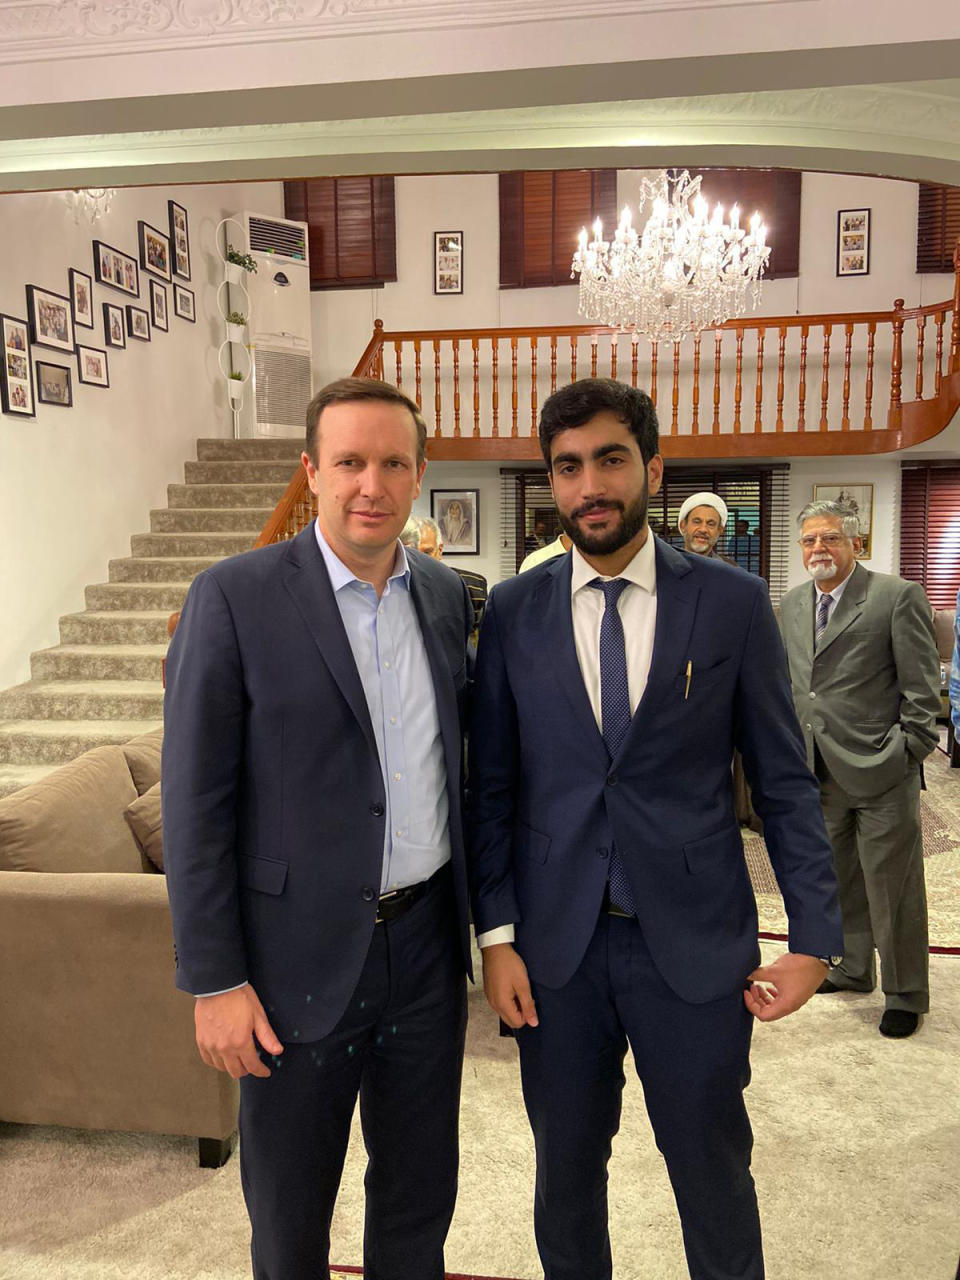 In this Saturday, Nov. 23, 2019 photo, provided by activists, U.S. Sen. Chris Murphy, D-Connecticut, left, poses with Adam Nabeel Rajab, son of imprisoned Bahraini human rights activist Nabeel Rajab, at the family's home in Manama, Bahrain. Murphy had been in the kingdom for the annual Manama Dialogue security conference. (AP Photo)